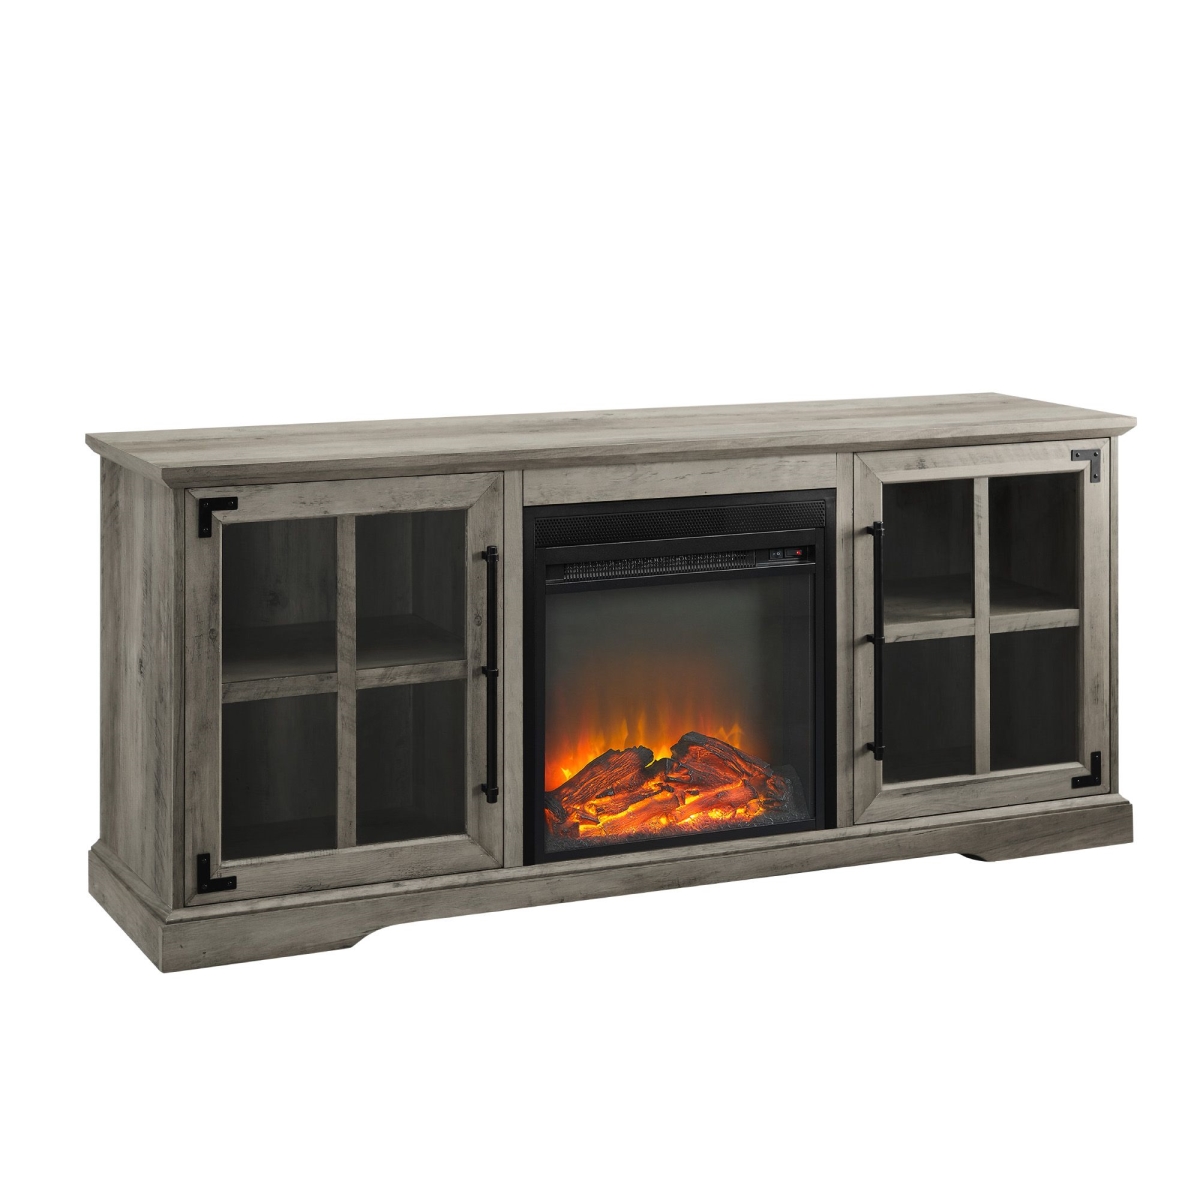 Picture of Walker Edison W60FPABGGW 60 in. 2 Door Fireplace Console, Grey Wash